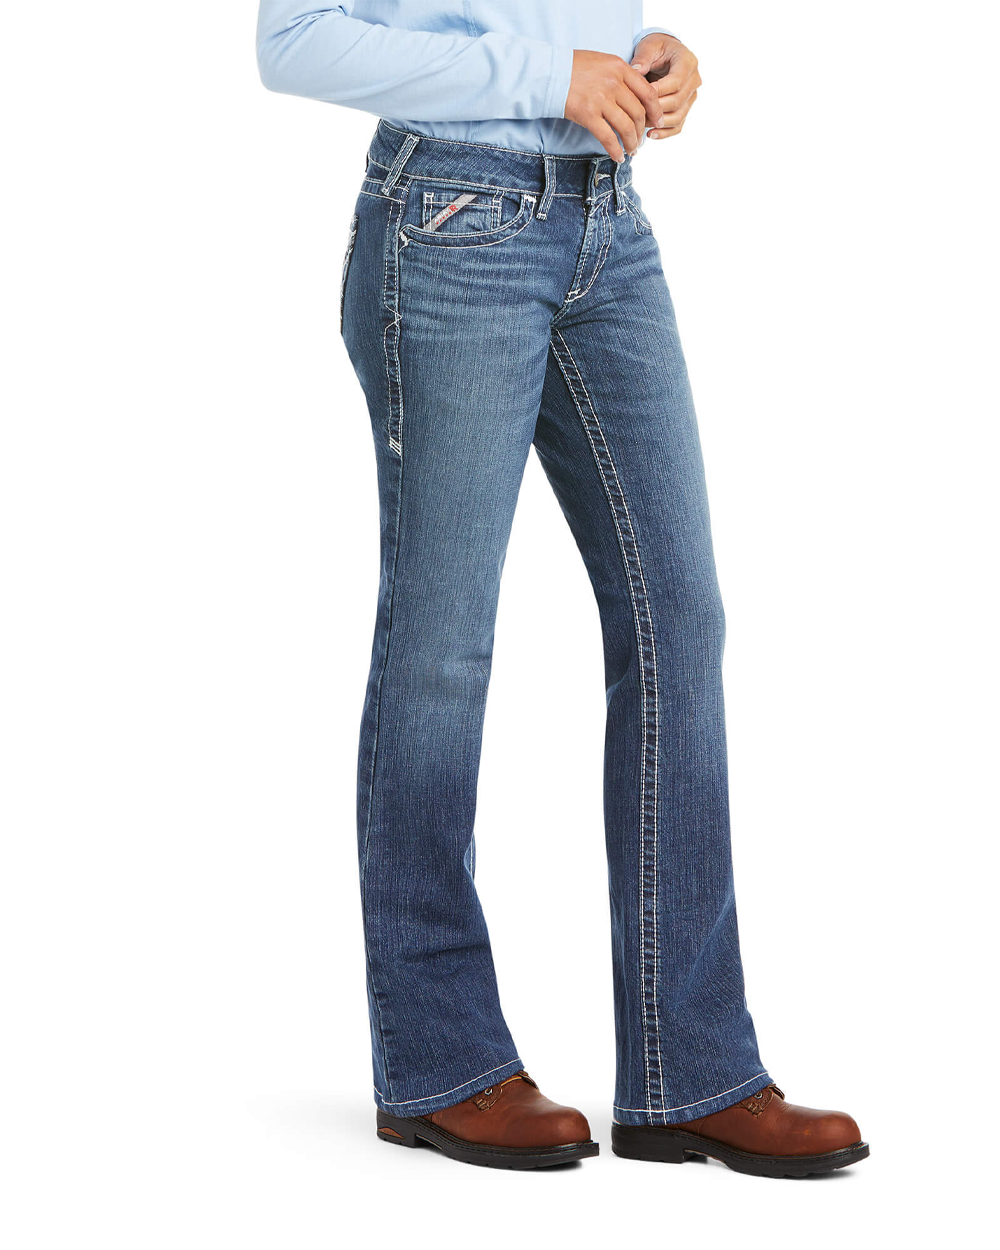 PSC - Ariat Women's FR DuraStretch Entwined Boot Cut Jean